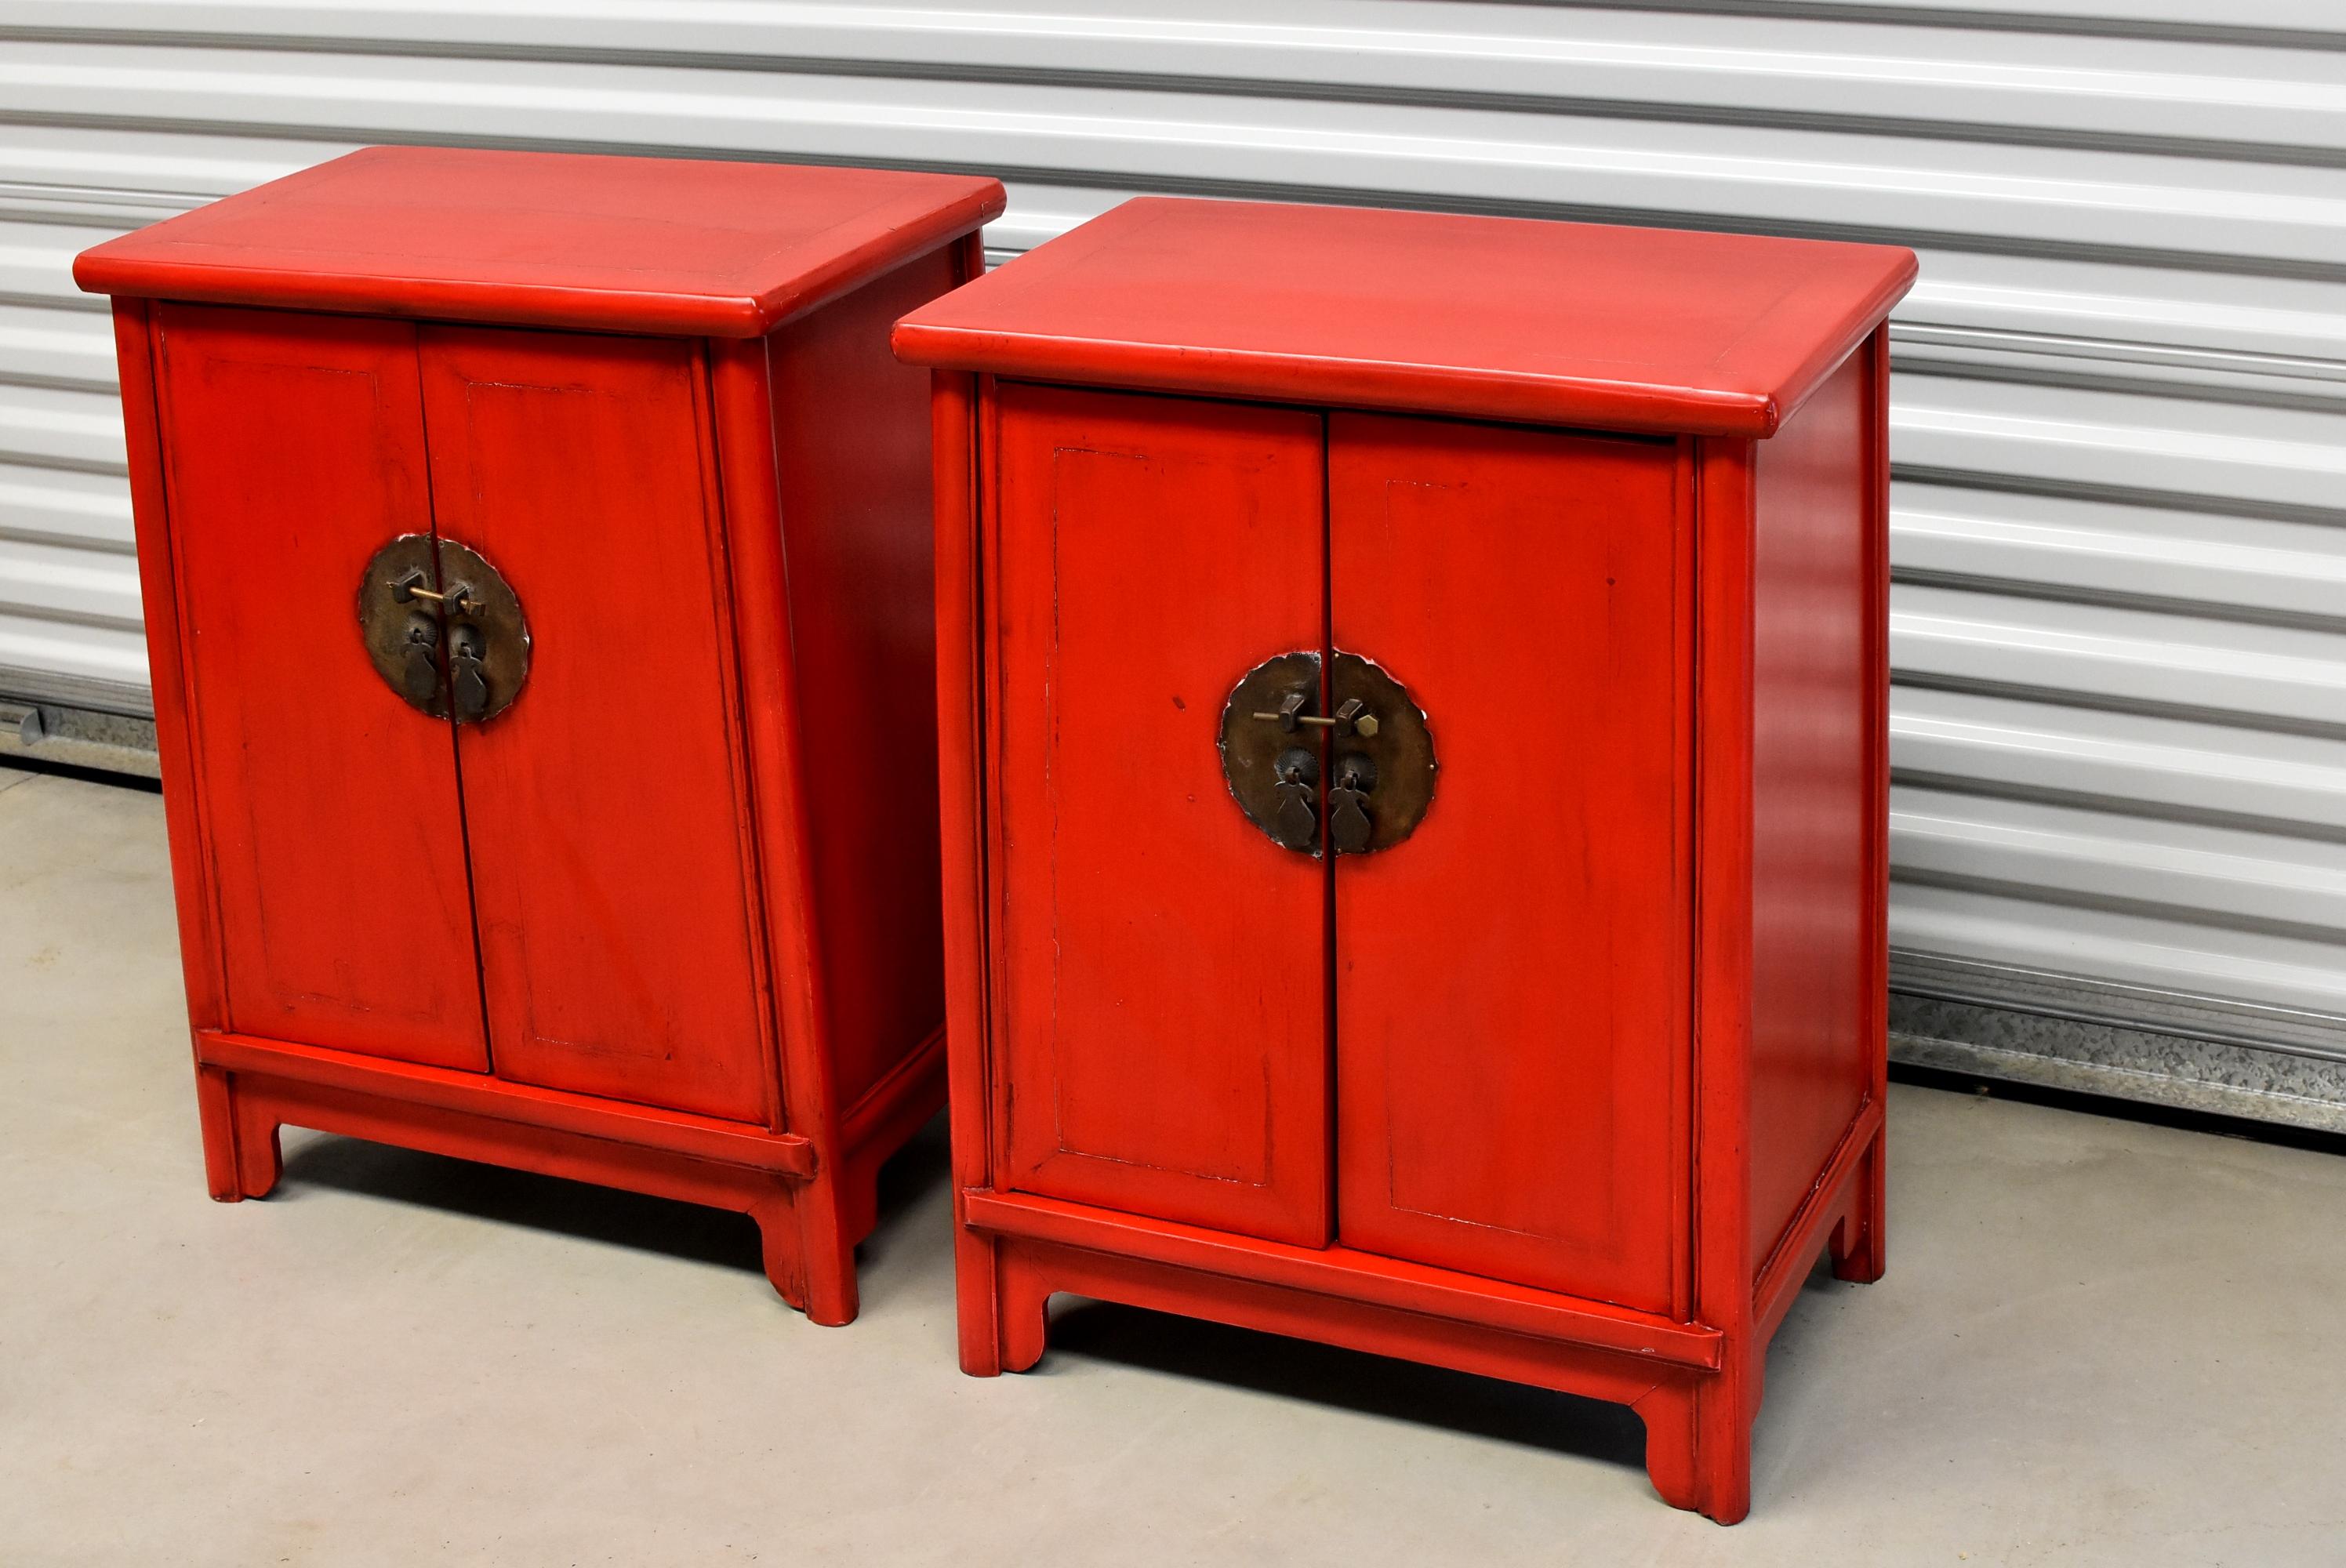 Price is for the PAIR. A pair of beautiful Chinese red lacquered cabinets. These cabinets were made in the Ming style, a timeless design that works well in almost any interiors. Saturated glorious, hand applied, red lacquer. Solid brass, custom